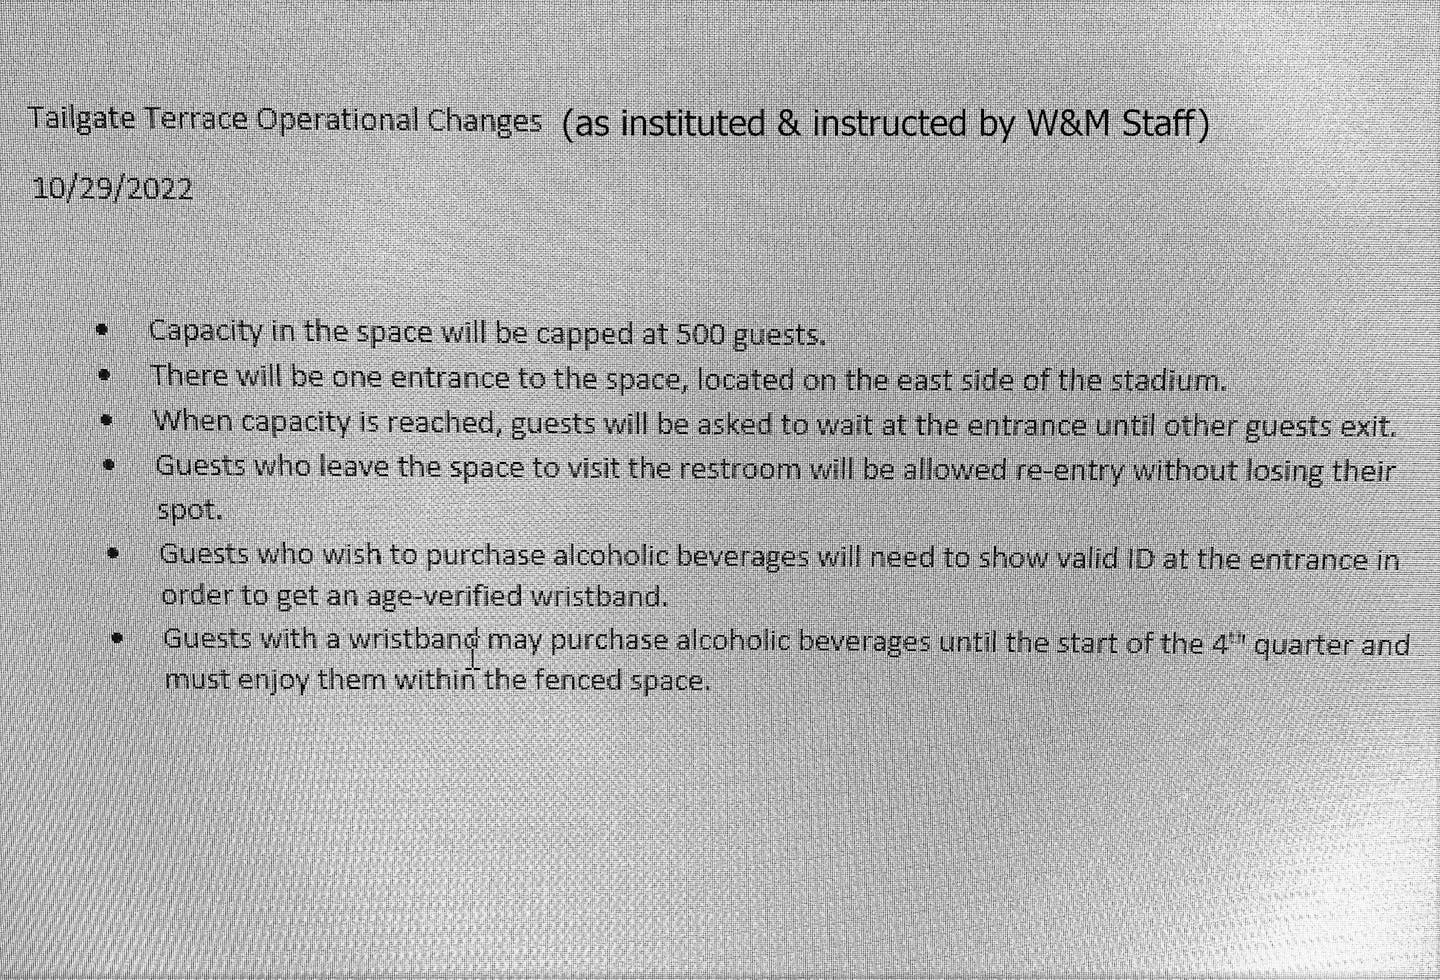 New Tailgate Terrace Rules